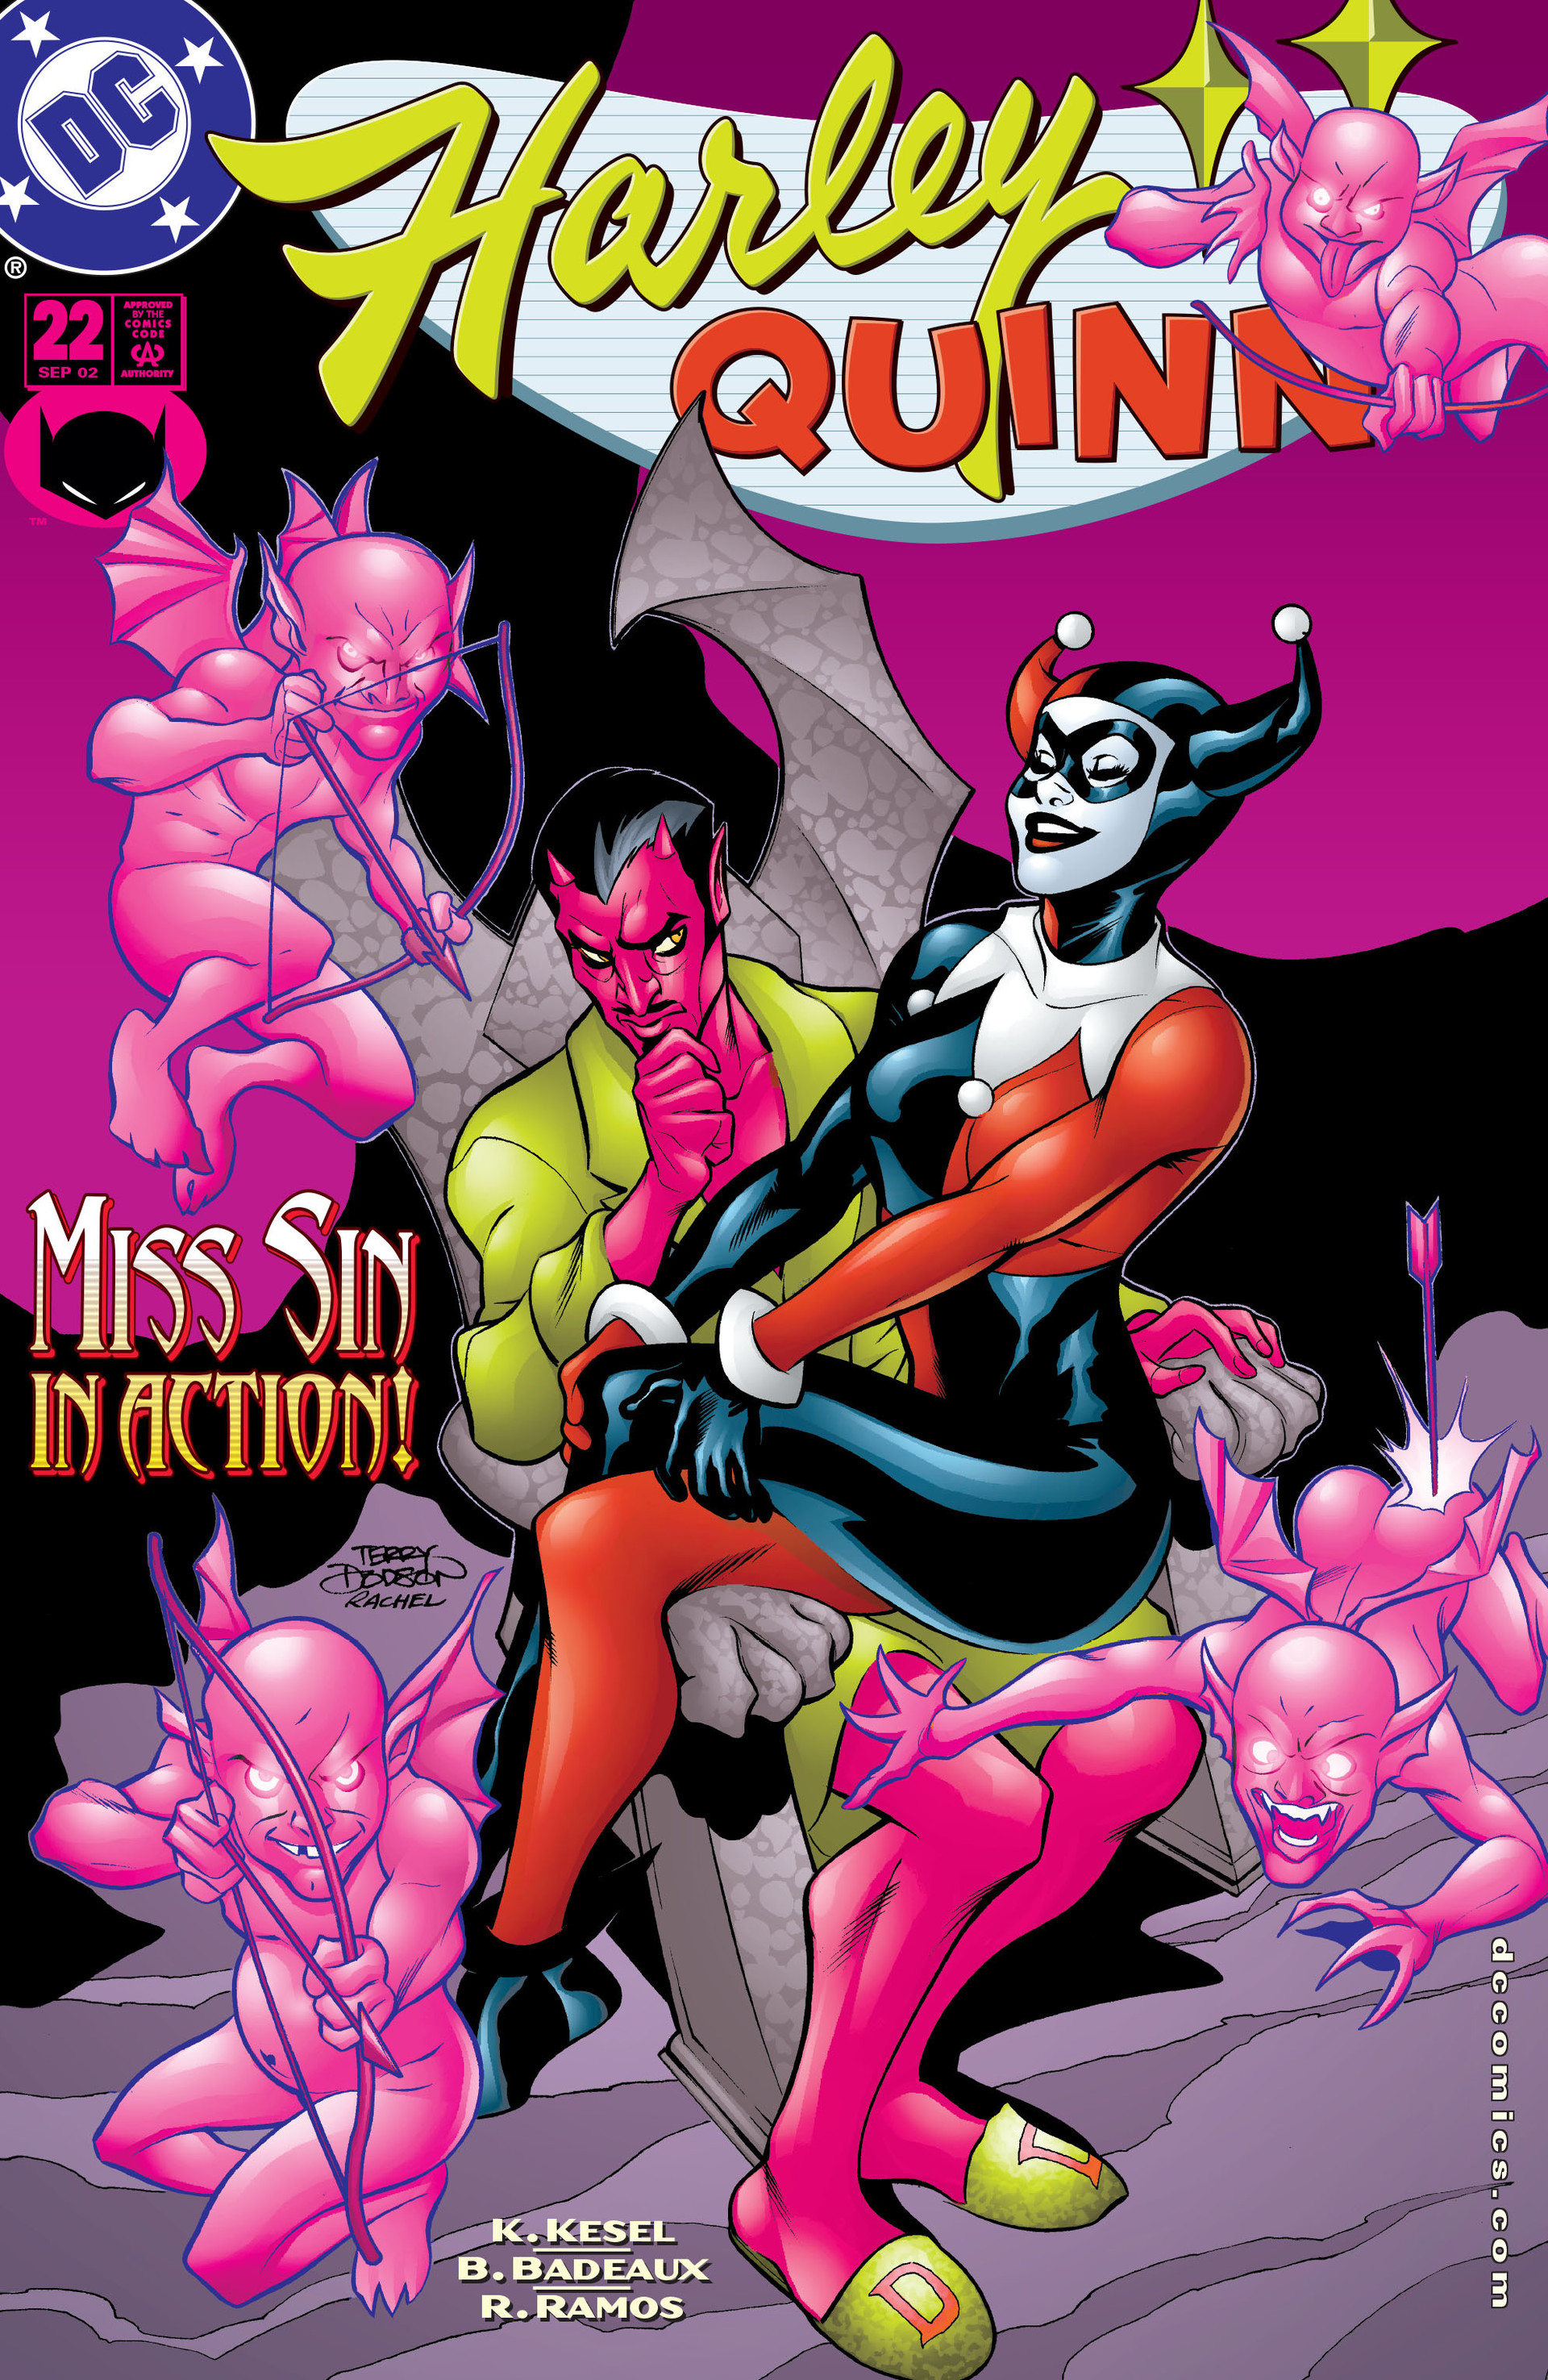 Read online Harley Quinn (2000) comic -  Issue #22 - 1